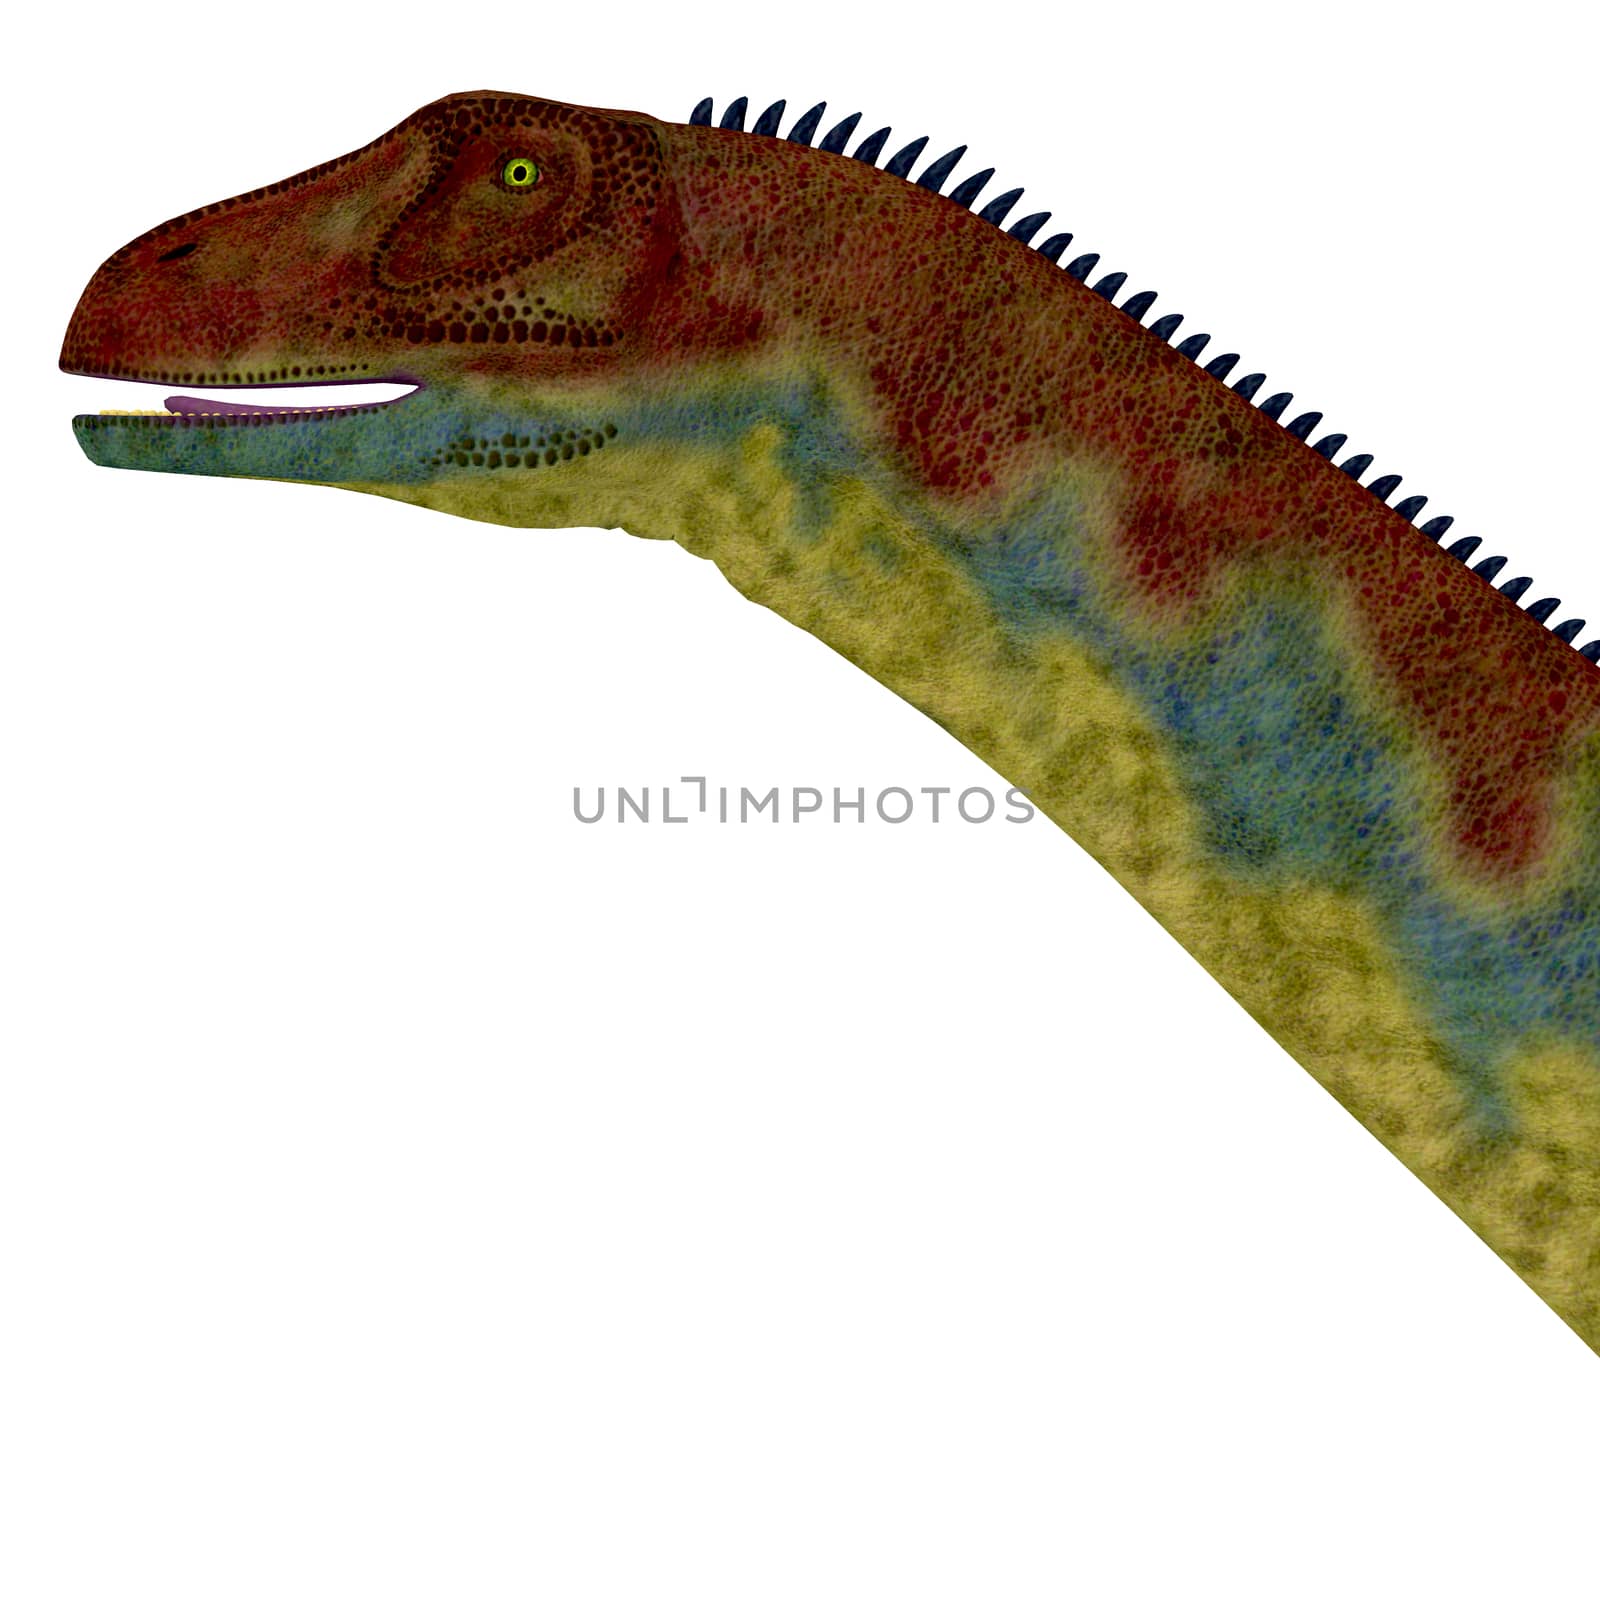 Jobaria was a herbivorous sauropod dinosaur that lived in the Jurassic Period of the Sahara Desert in Africa.